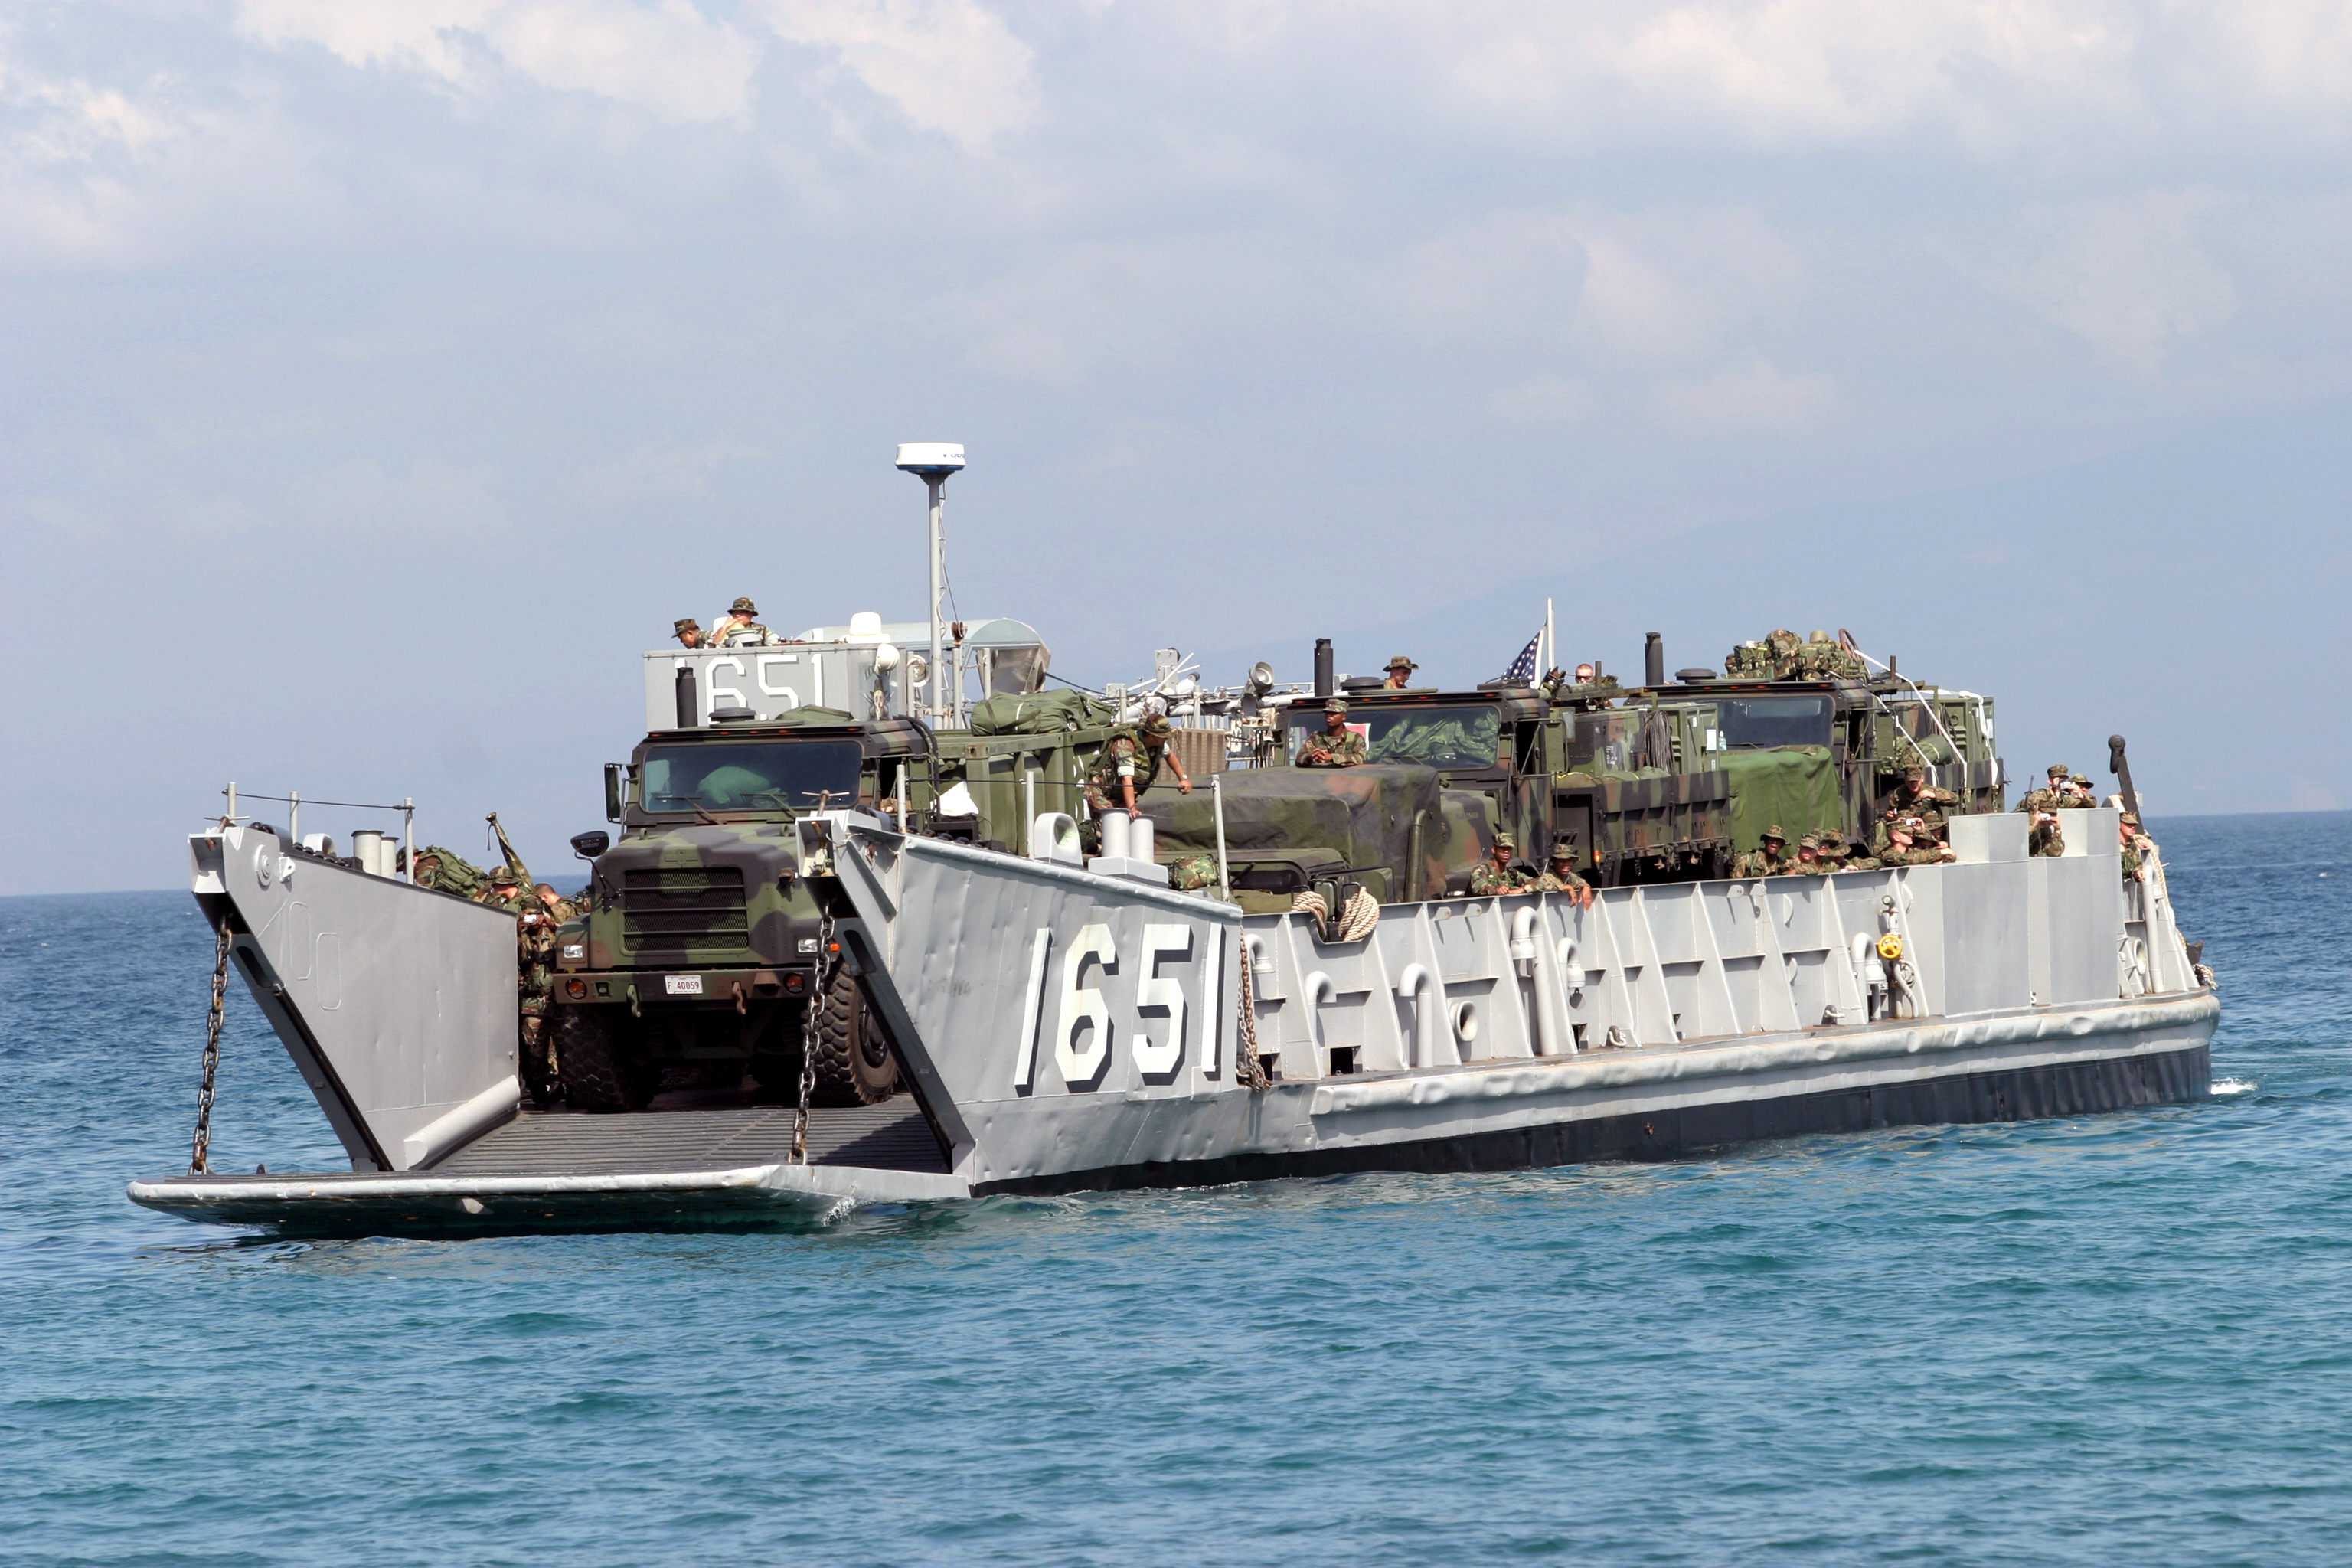 US_Navy_040223-M-4806Y-043_A_Landing_Craft_Utility_(LCU)_arrives_just_offshore_to_unload_supplies_and_equipment_in_support_of_exercise_Balikatan_2004.jpg